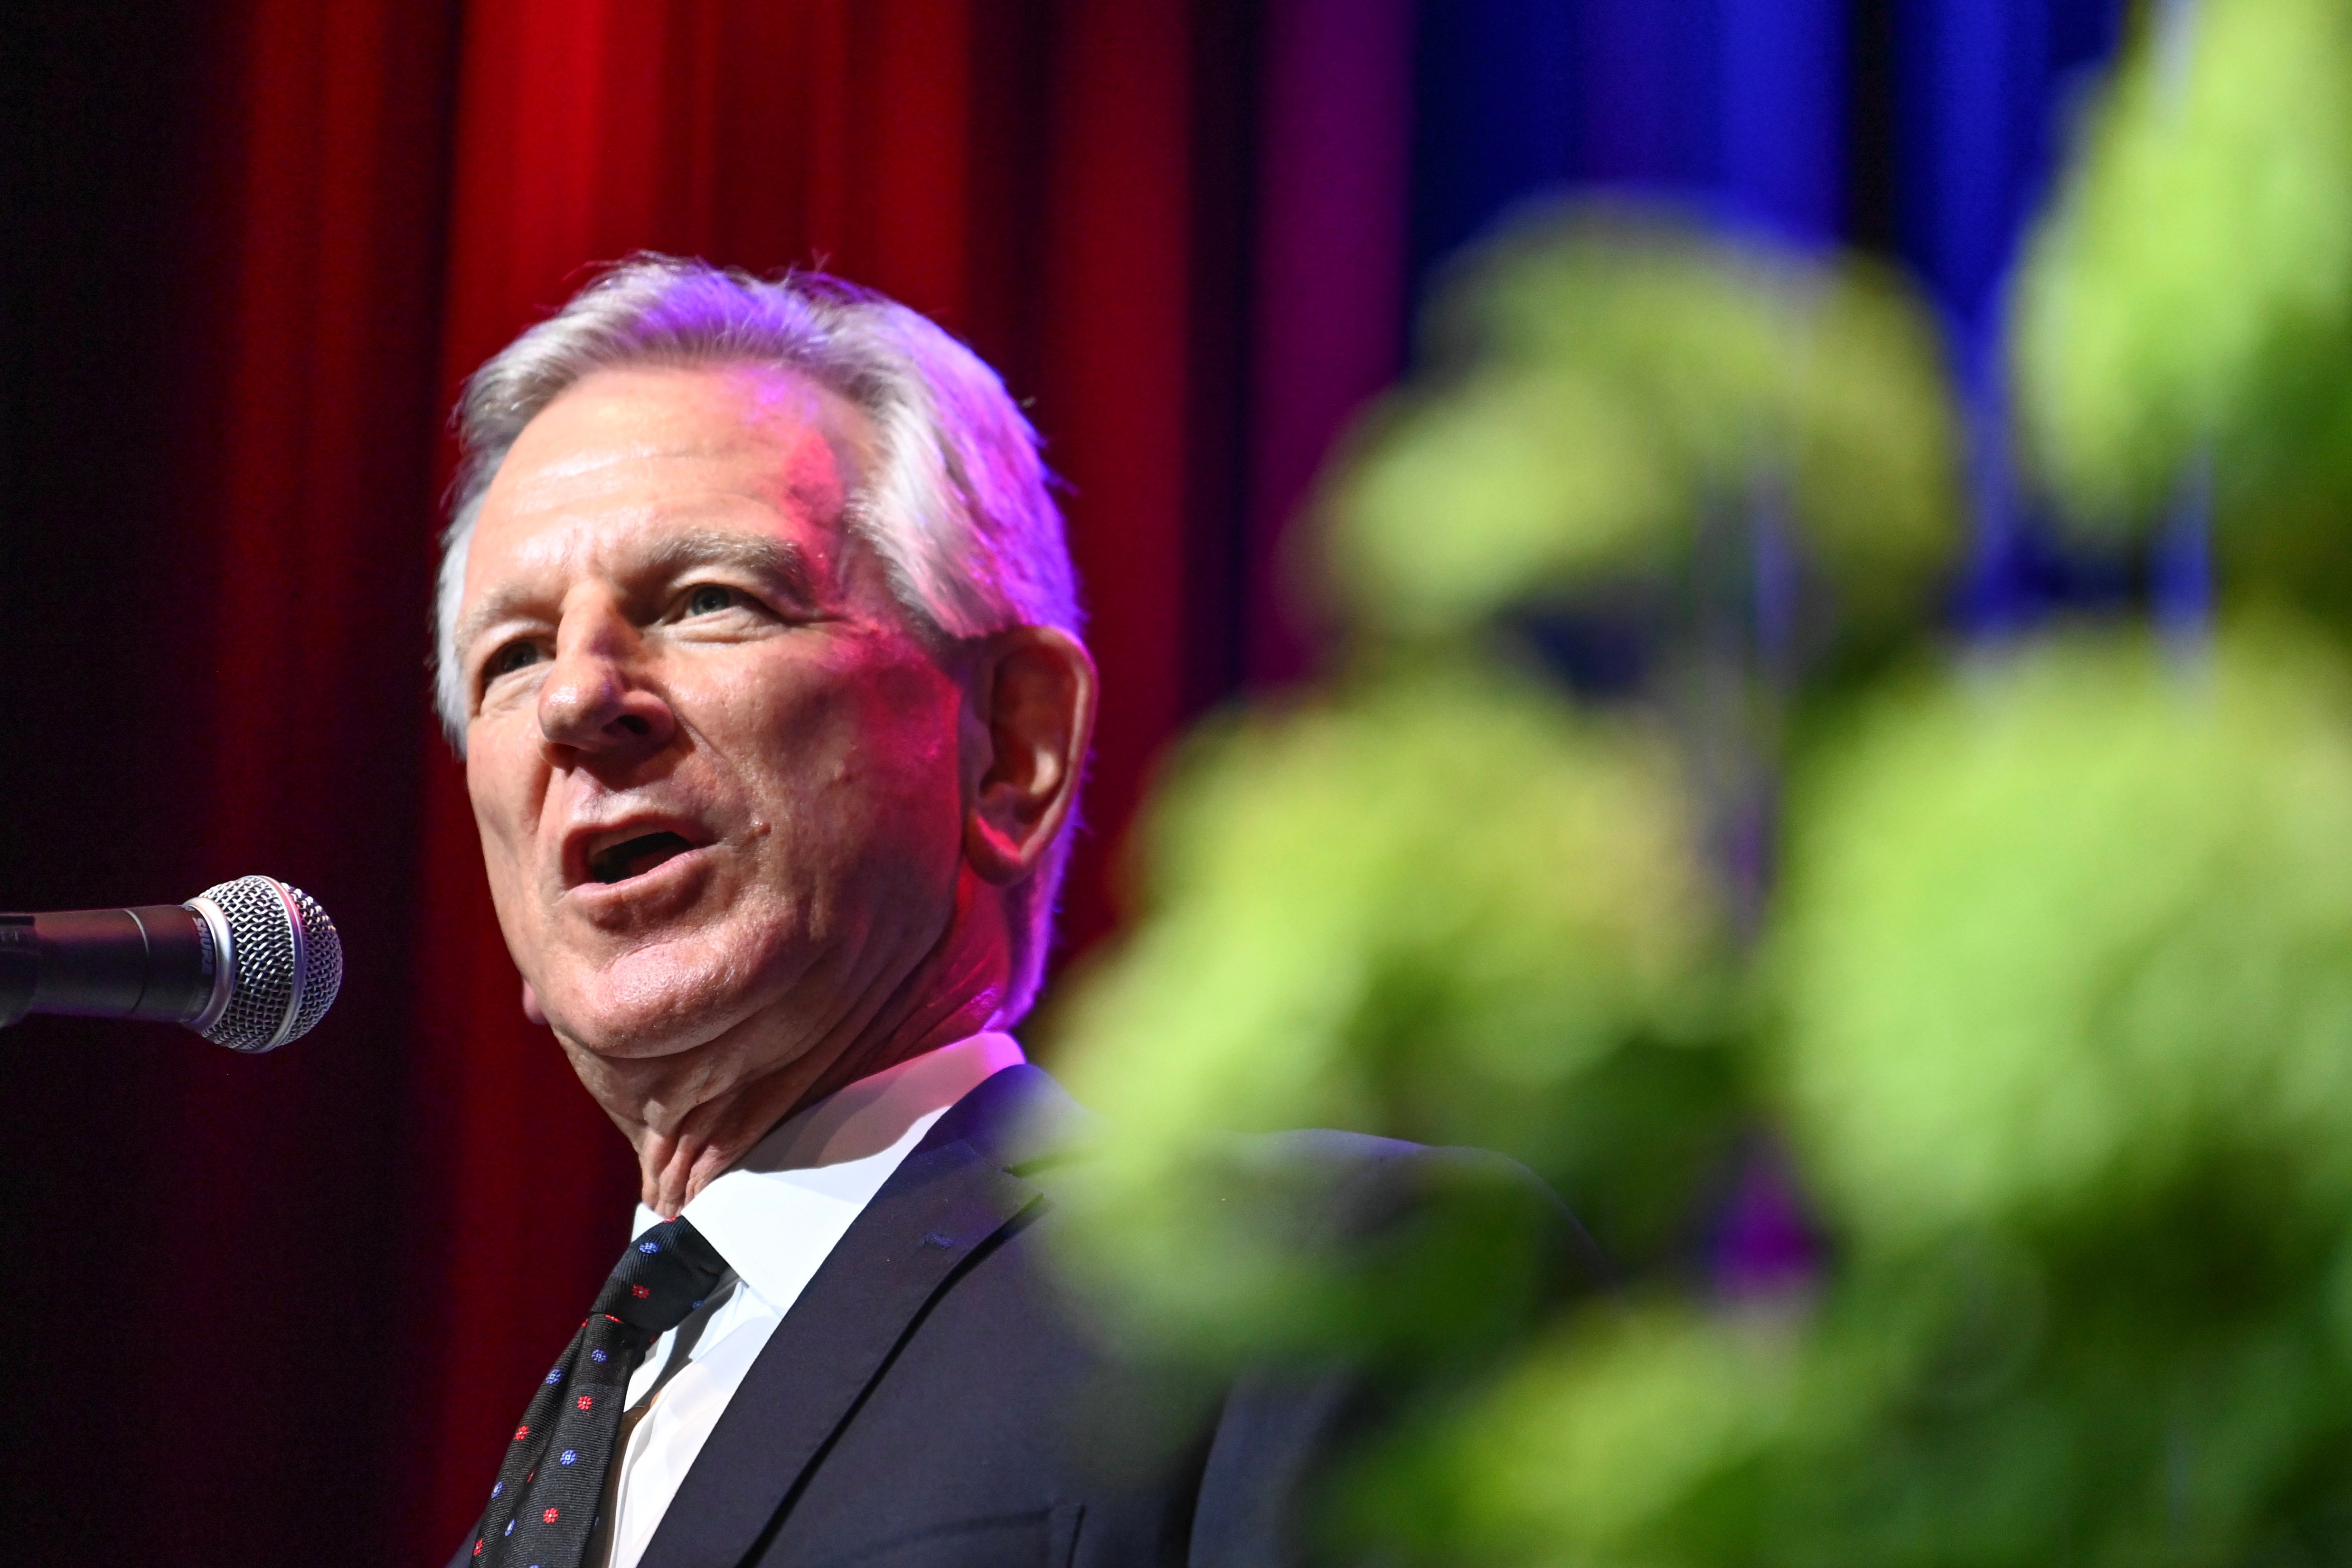 Alabama Senator Tommy Tuberville no longer owns property in the state, according to a report